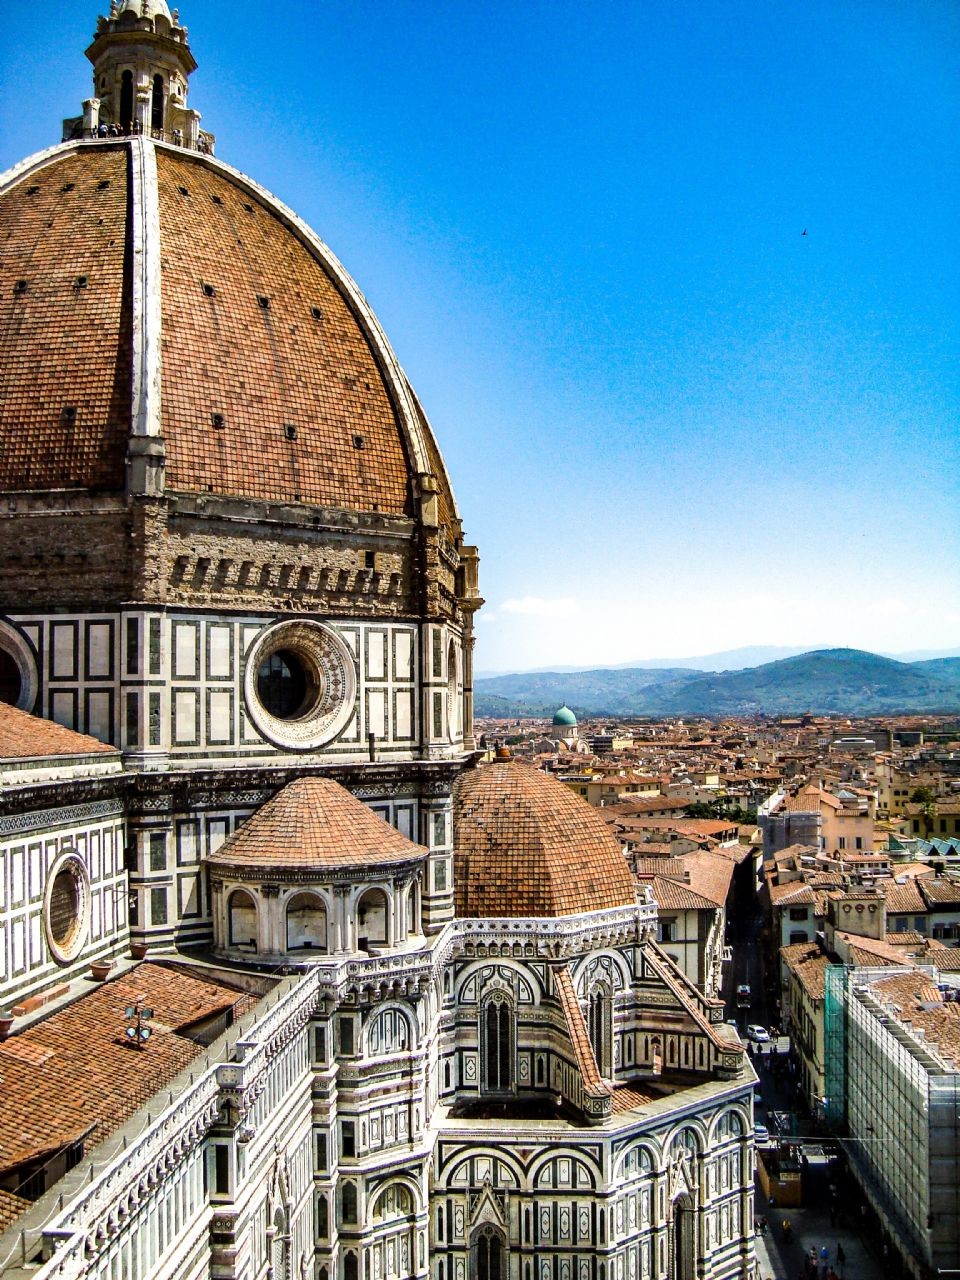 Florence is one of the most beautiful cities in Italy with its breathtaking architecture, stunning art collections and rich history.